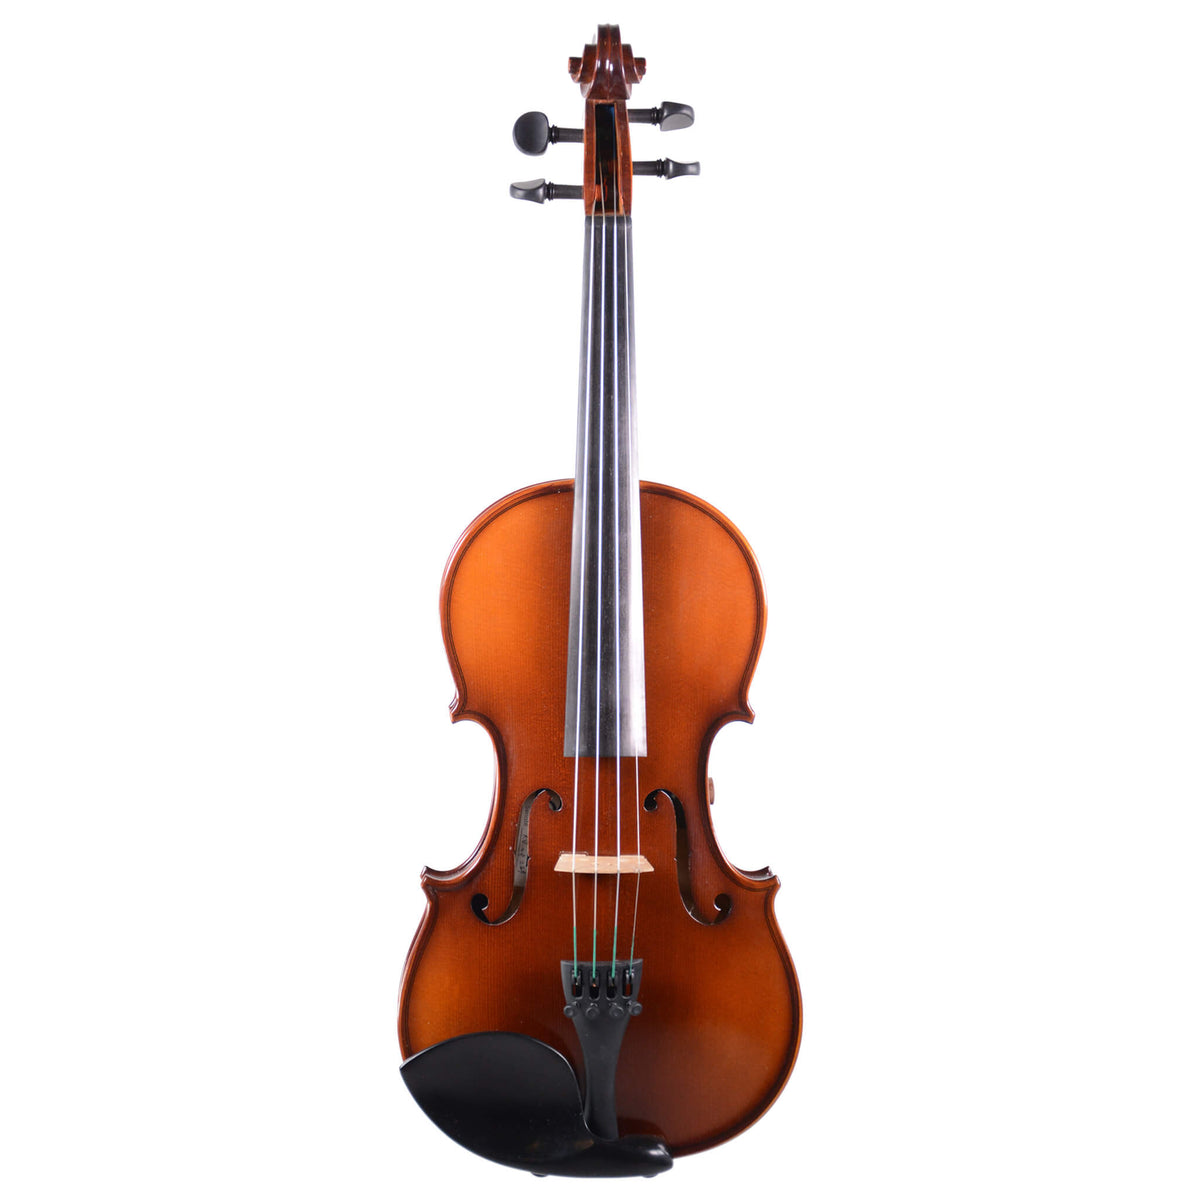 Realist Acoustic-Electric 4-string Violin with Case